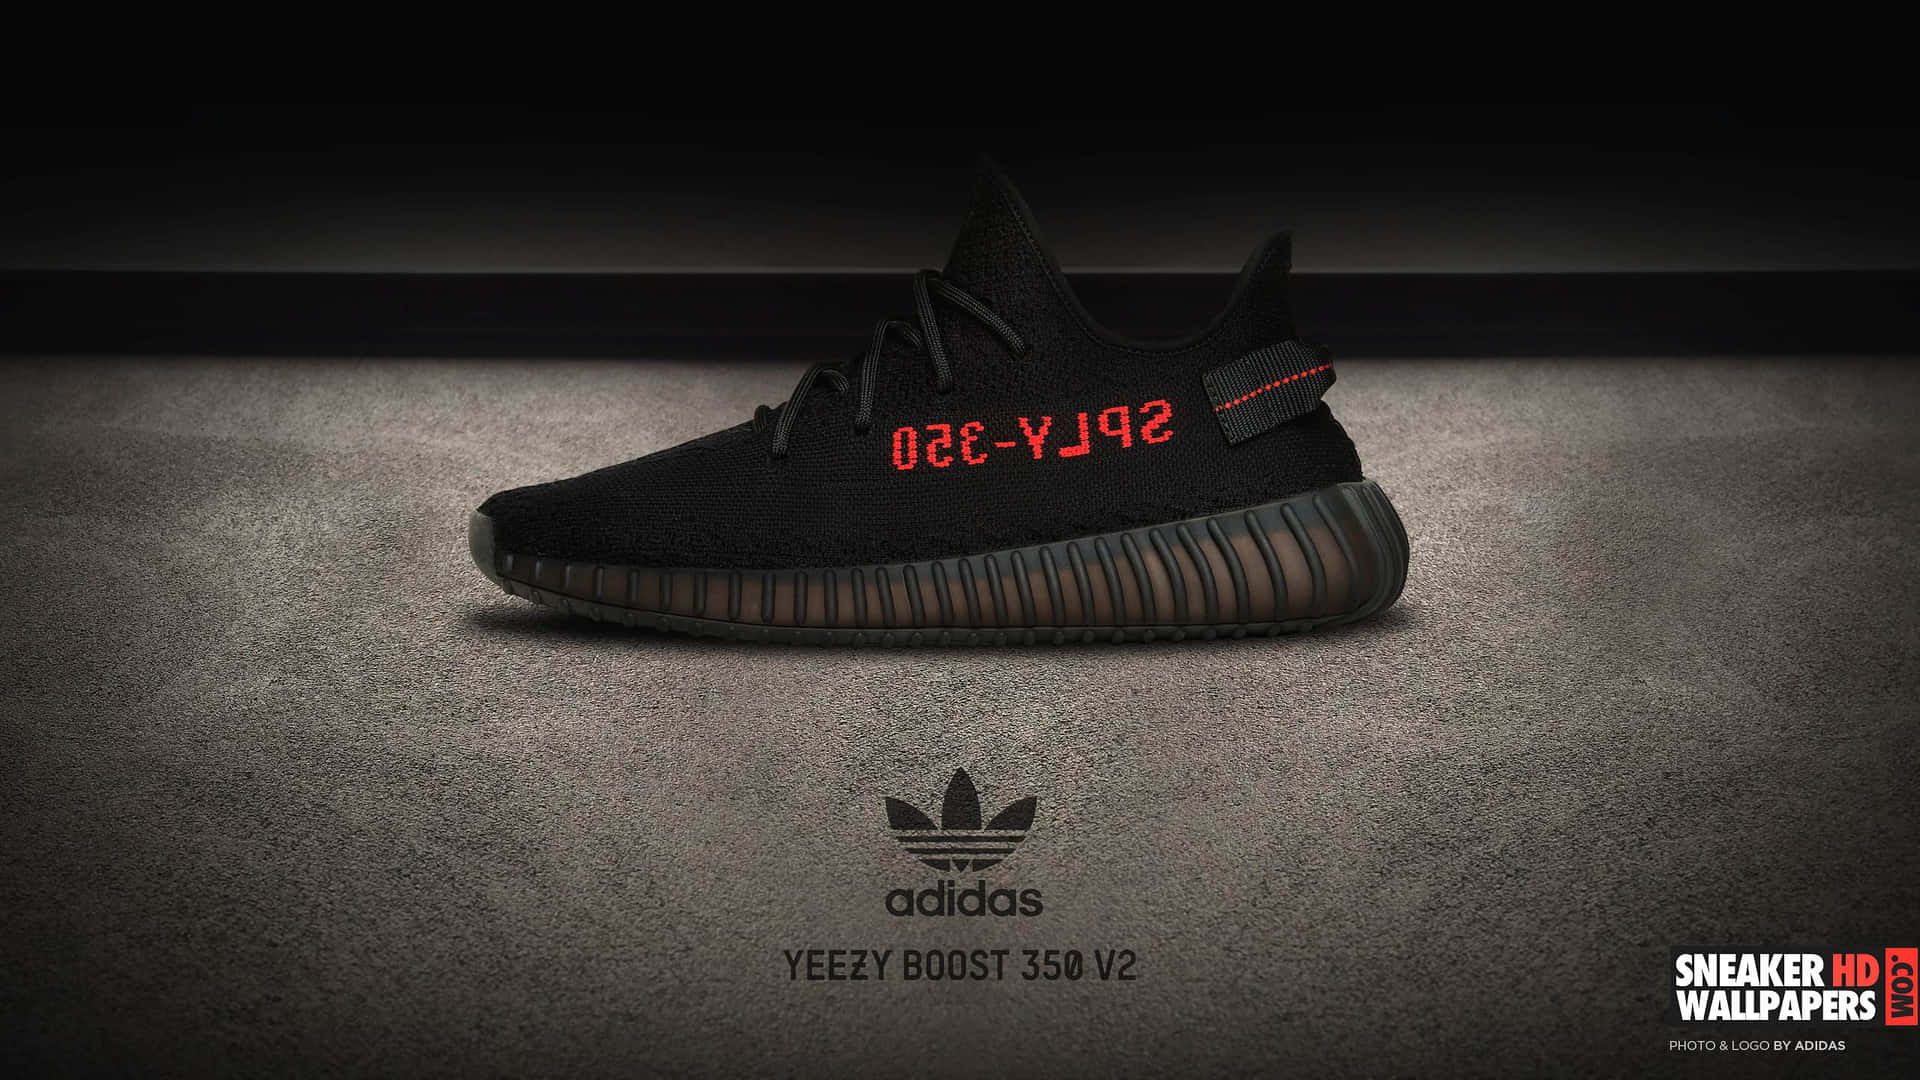 "Release Day with Yeezy" Wallpaper